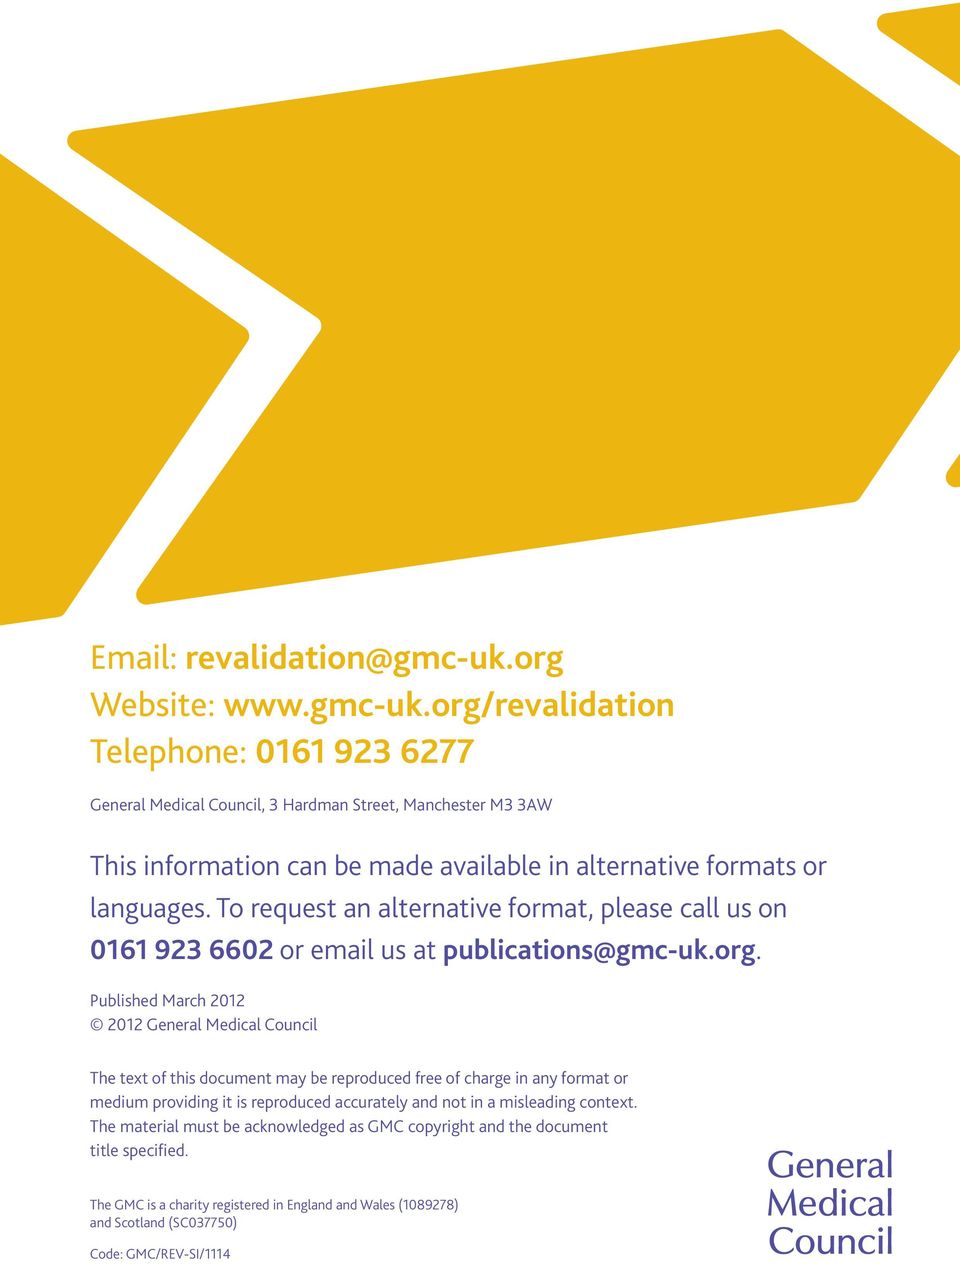 org/revalidation Telephone: 0161 923 6277 General Medical Council, 3 Hardman Street, Manchester M3 3AW This information can be made available in alternative formats or languages.